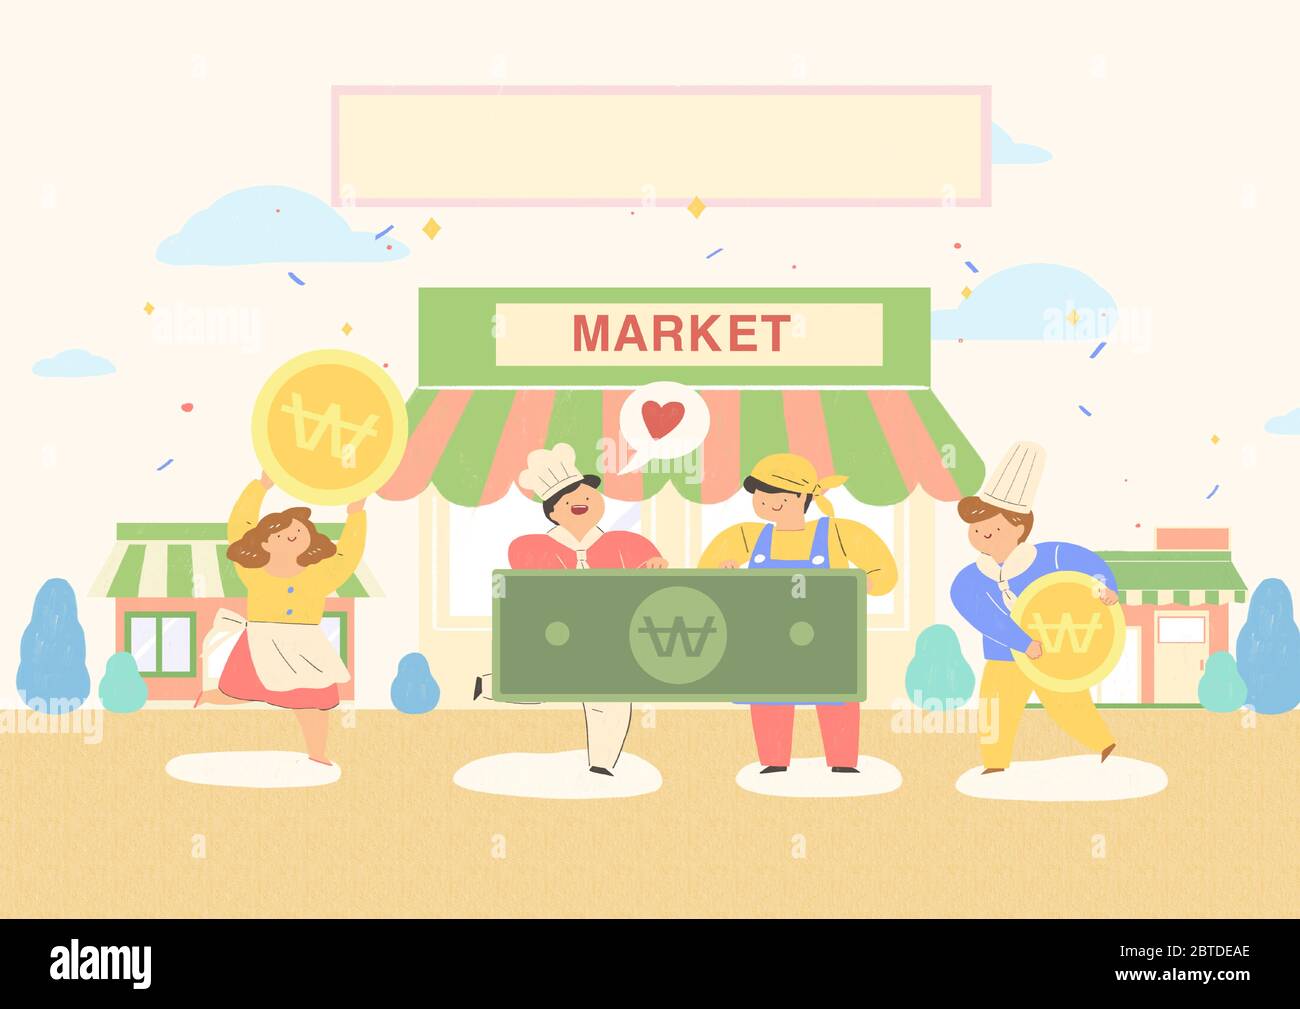 Local market conept, people selling or shopping illustration. 007 Stock Vector